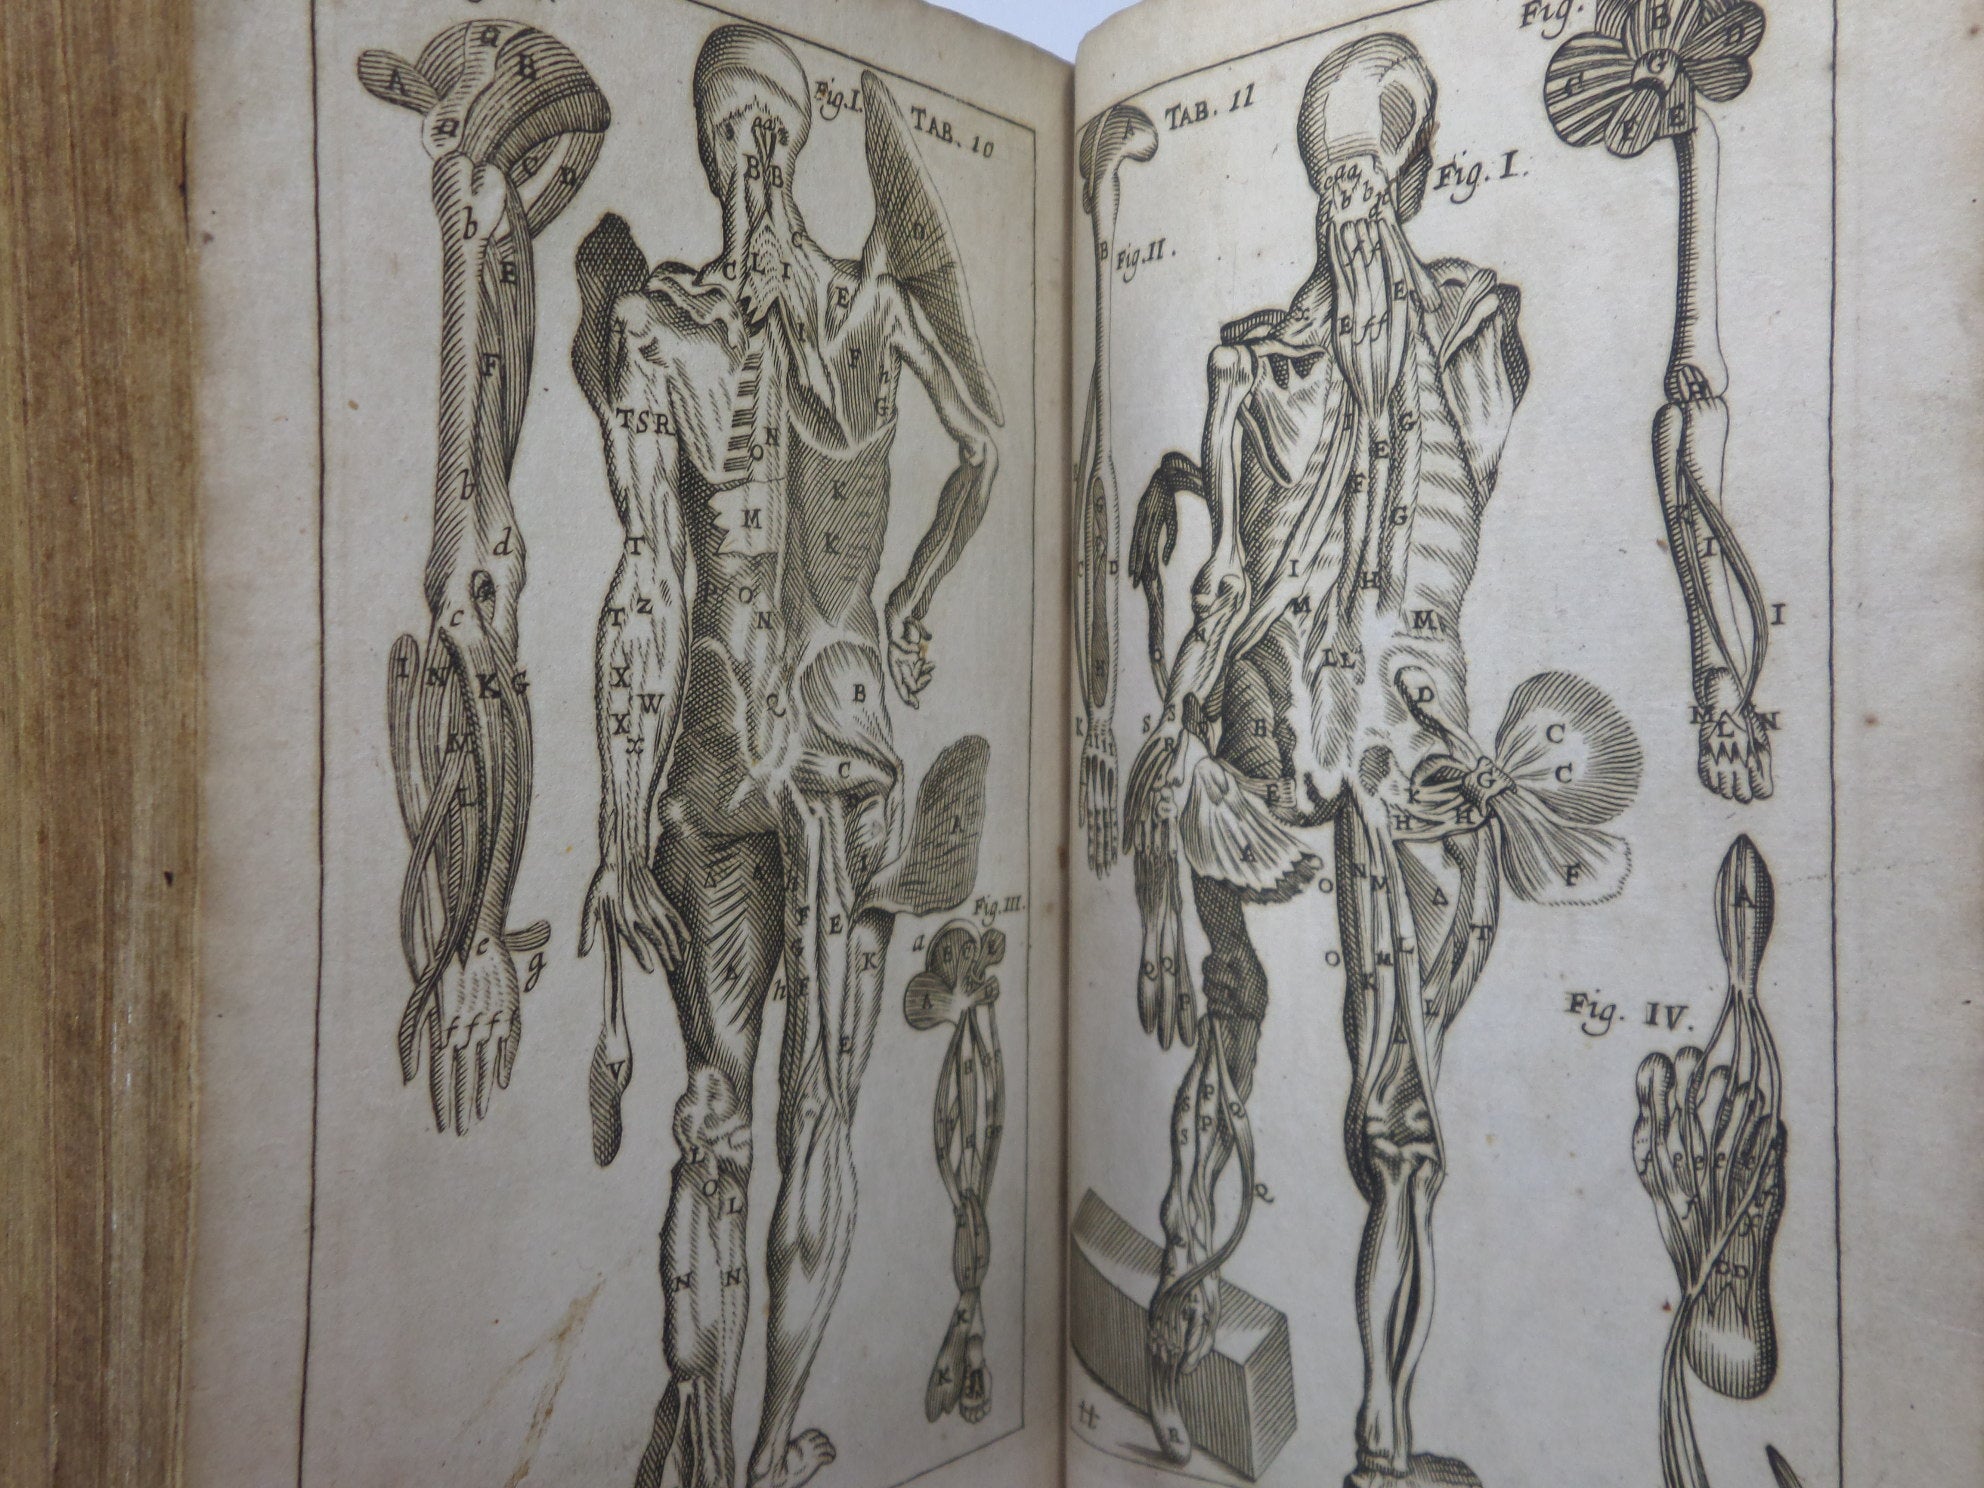 ARS ANATOMICA OR THE ANATOMY OF HUMANE BODIES, WILLIAM SALMON 1714 FIRST EDITION